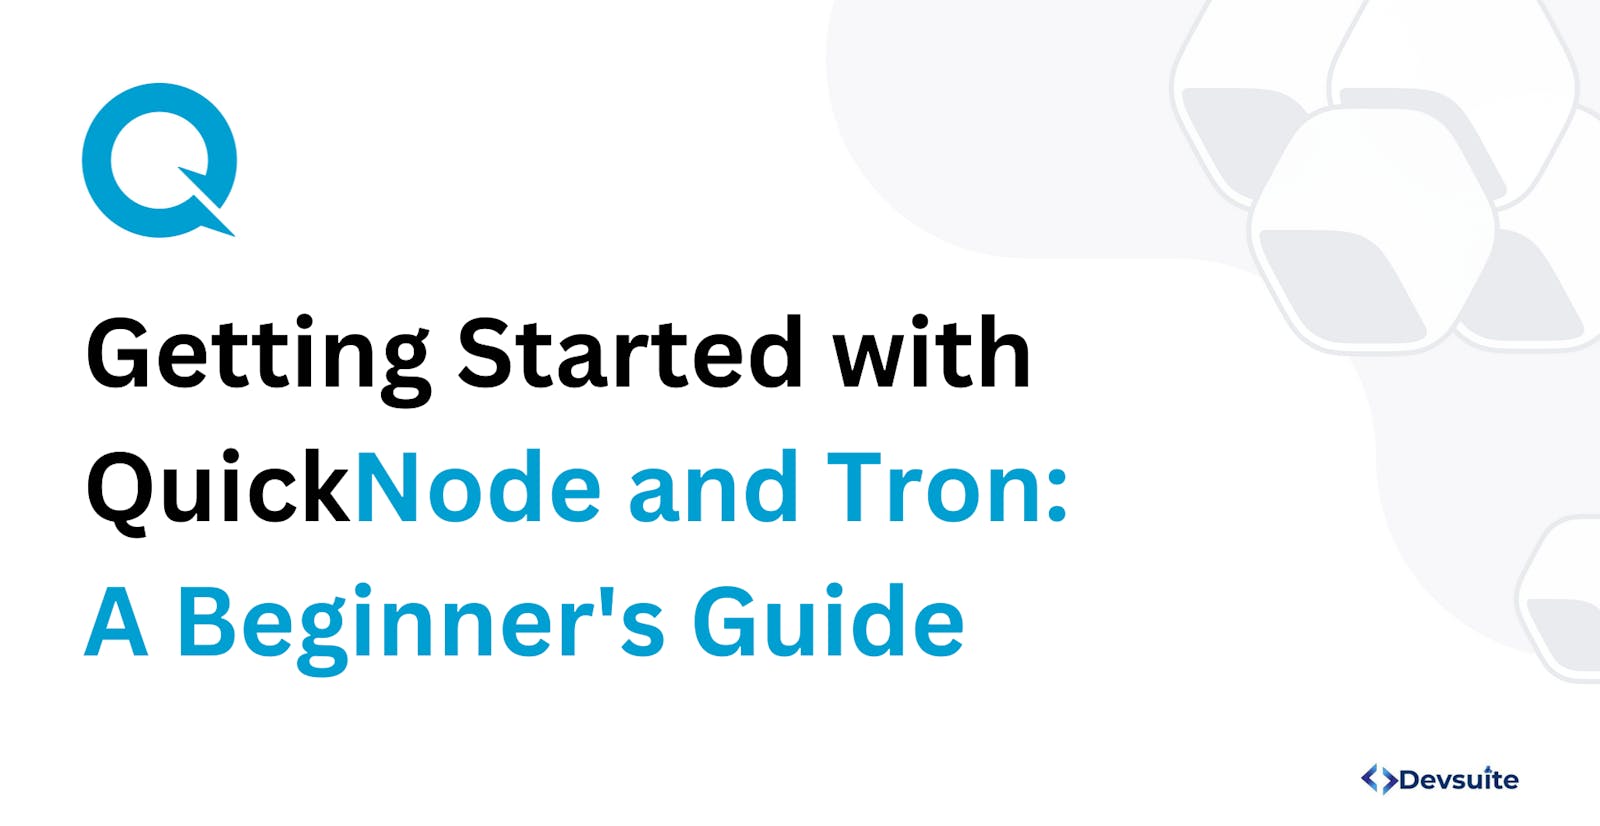 Getting Started with QuickNode and Tron: A Beginner's Guide